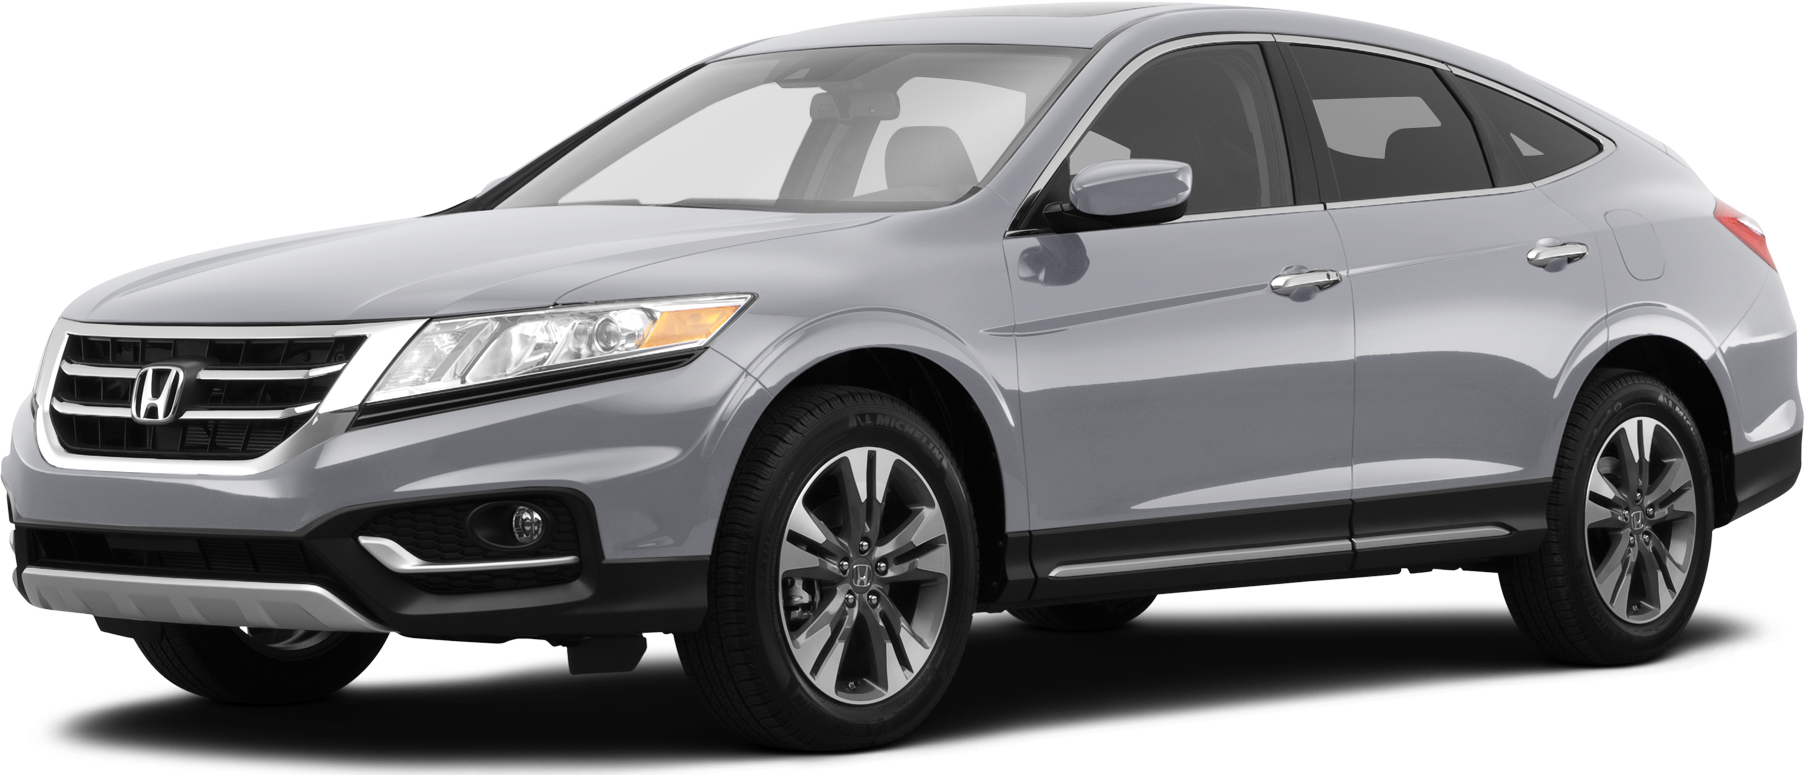 2014 Honda Crosstour Price Value Ratings And Reviews Kelley Blue Book